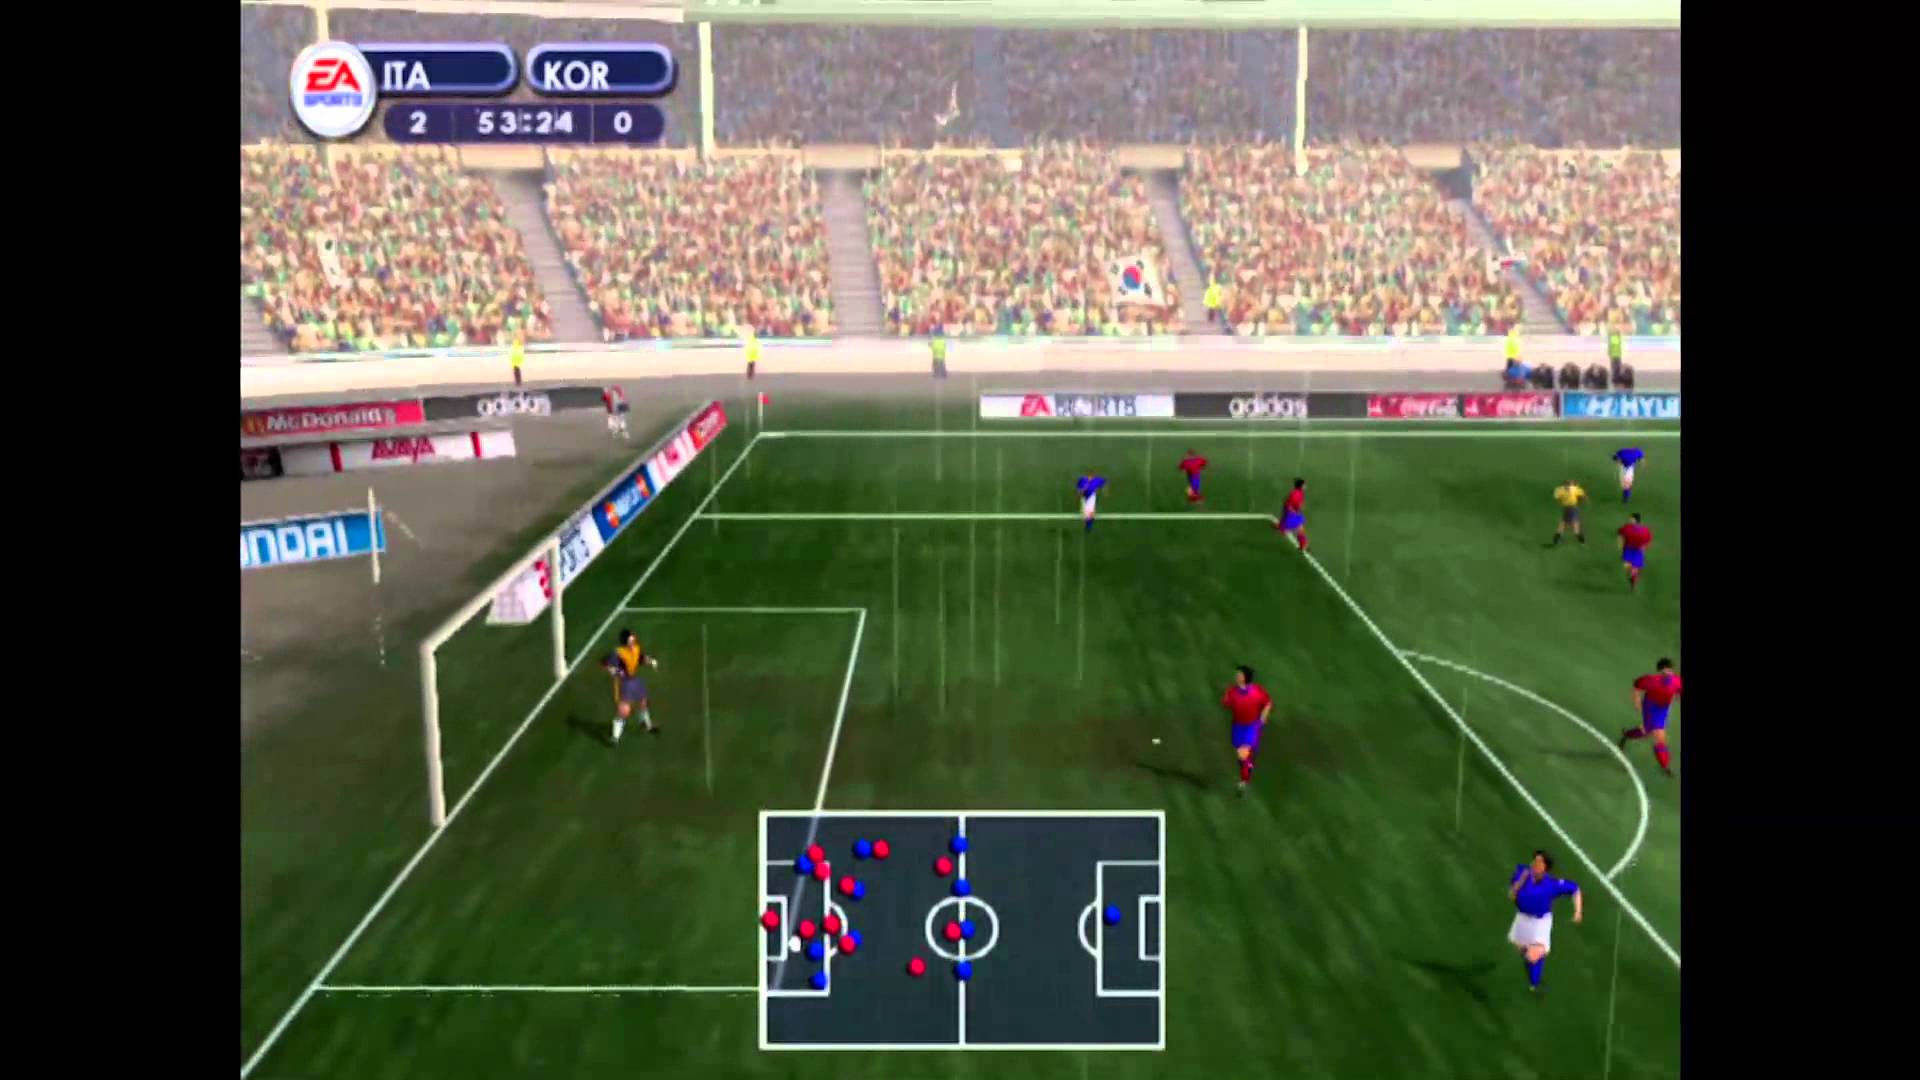 download fifa 2006 world cup torrent iso games